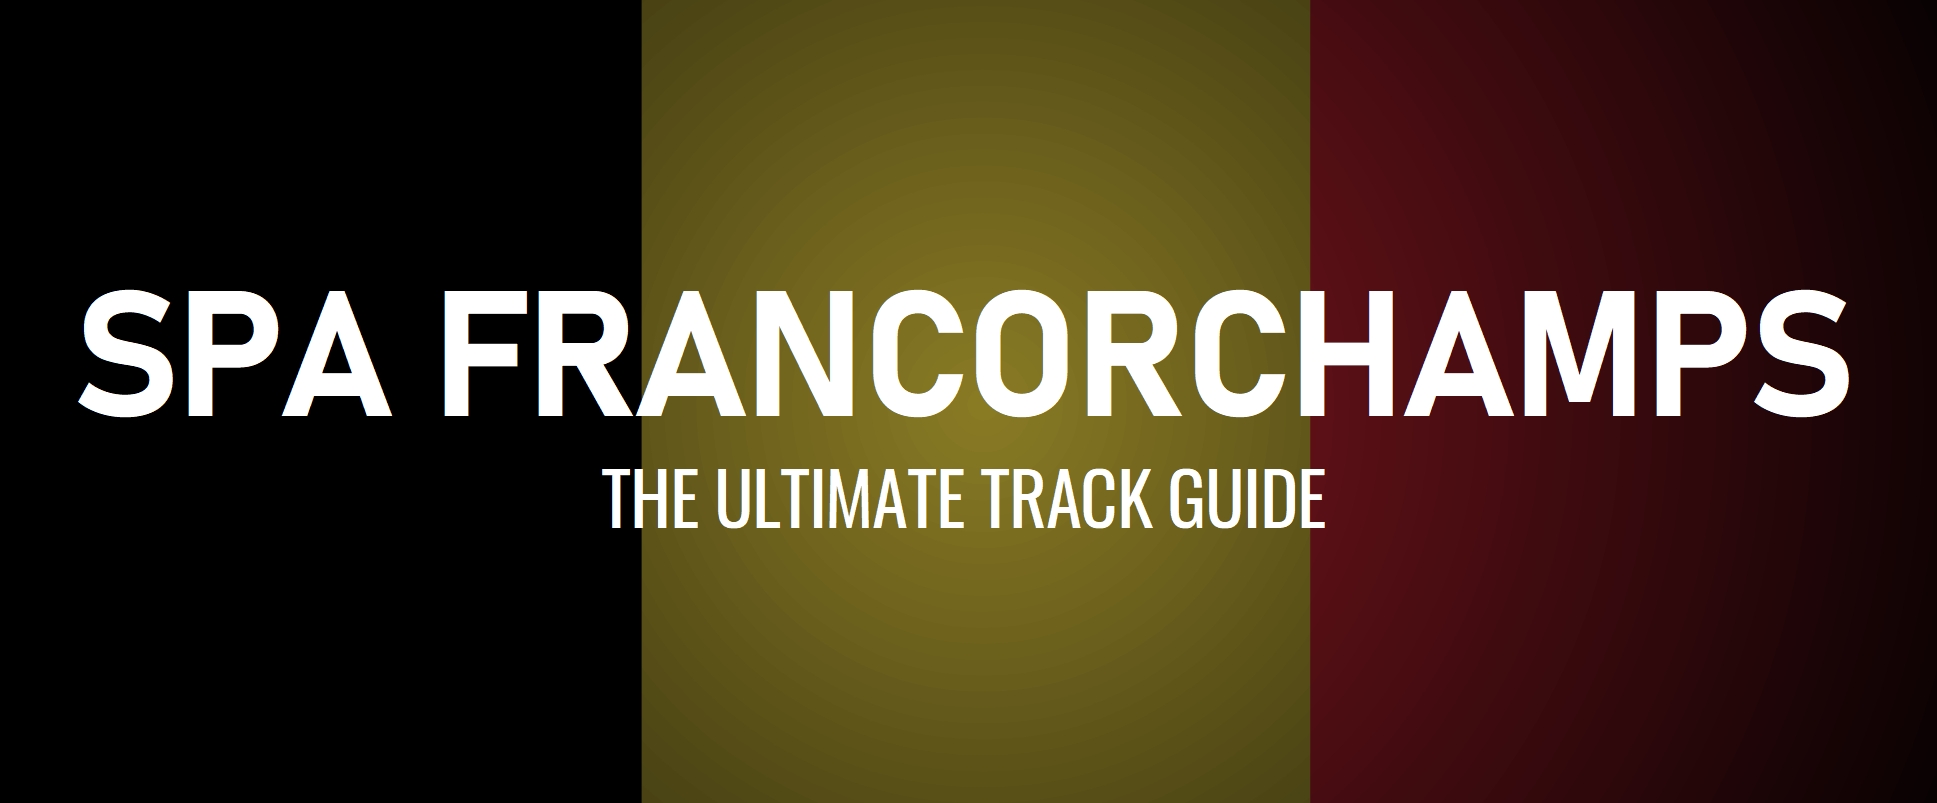 Spa Francorchamps Track Layout: F1 Circuit Map, Guide & Details